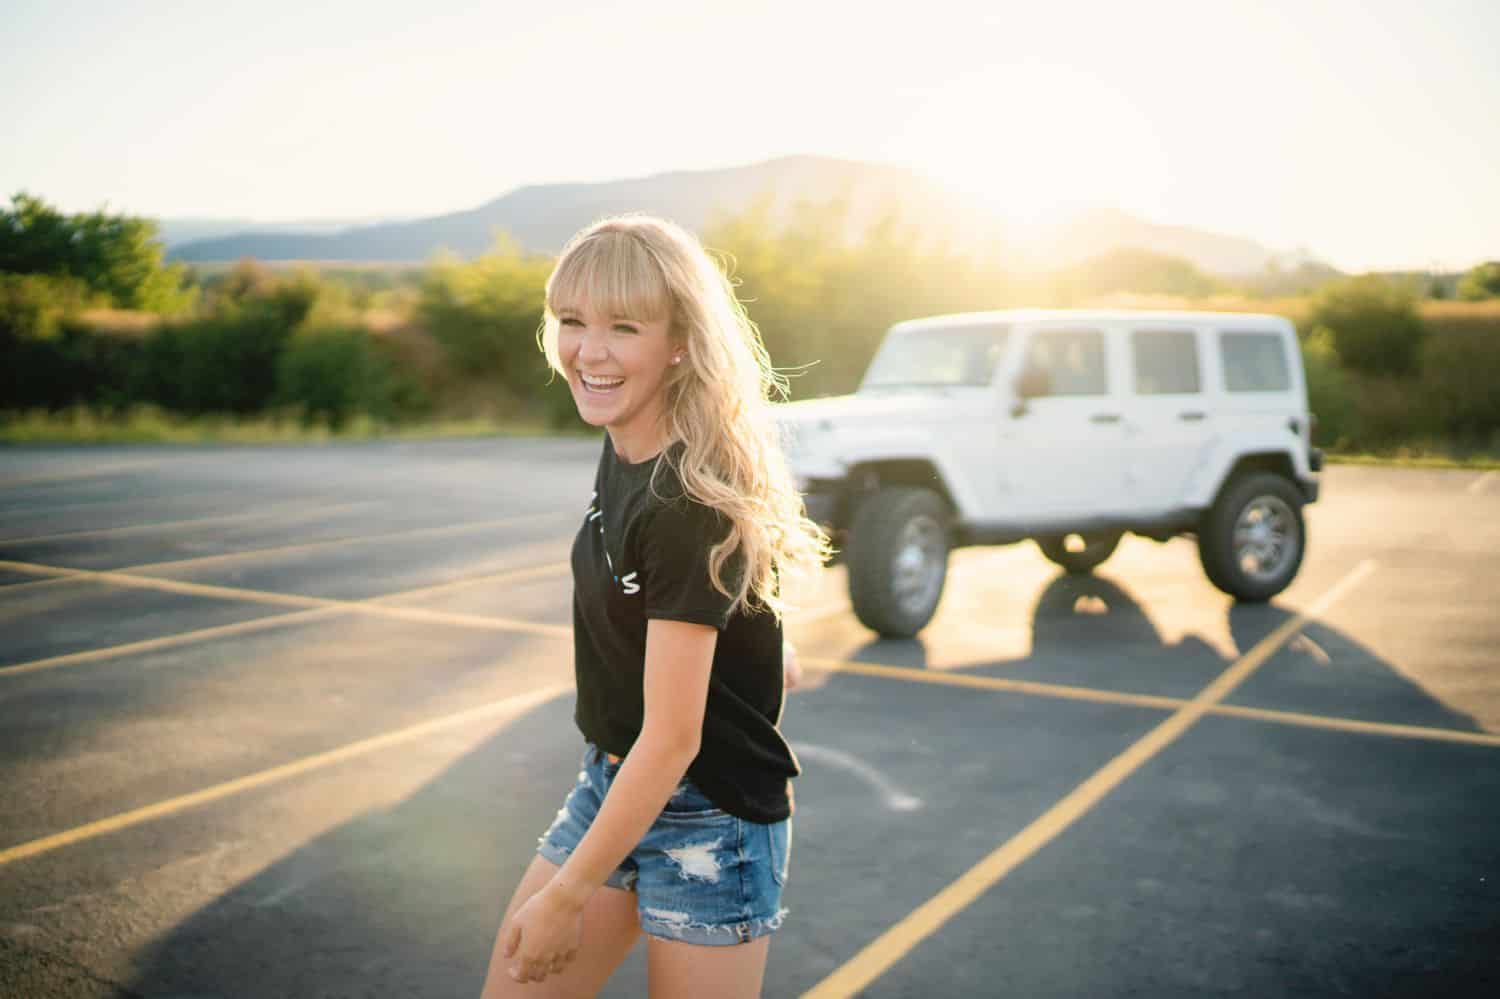 A senior girls smiles as she walks away from her white Jeep parked in the sunset